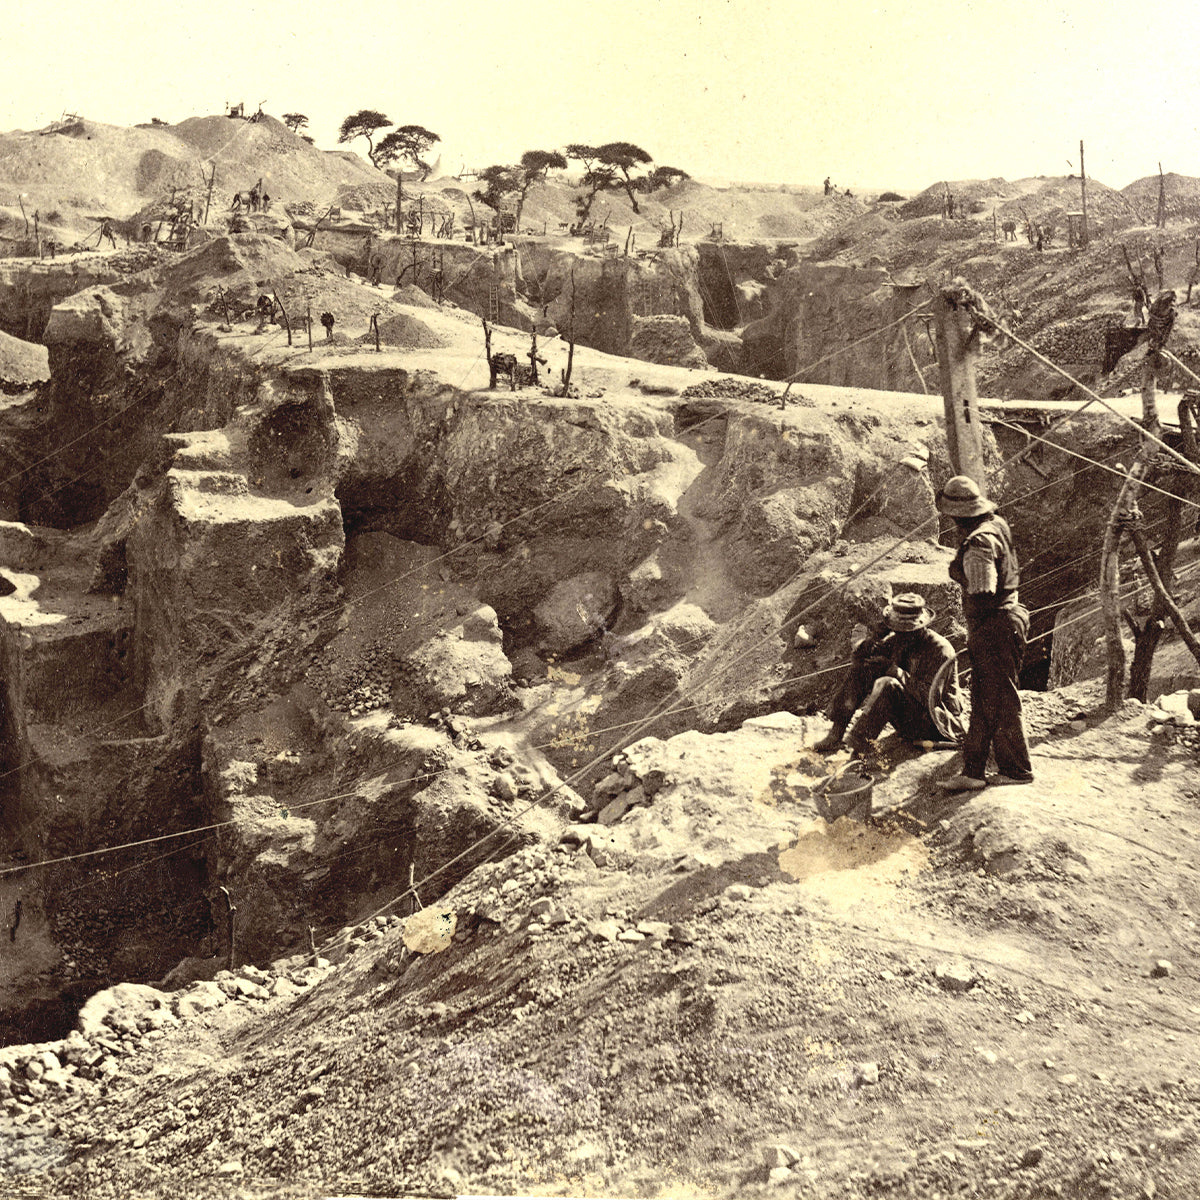 Historical photograph of the Kimberly diamond mine in South Africa